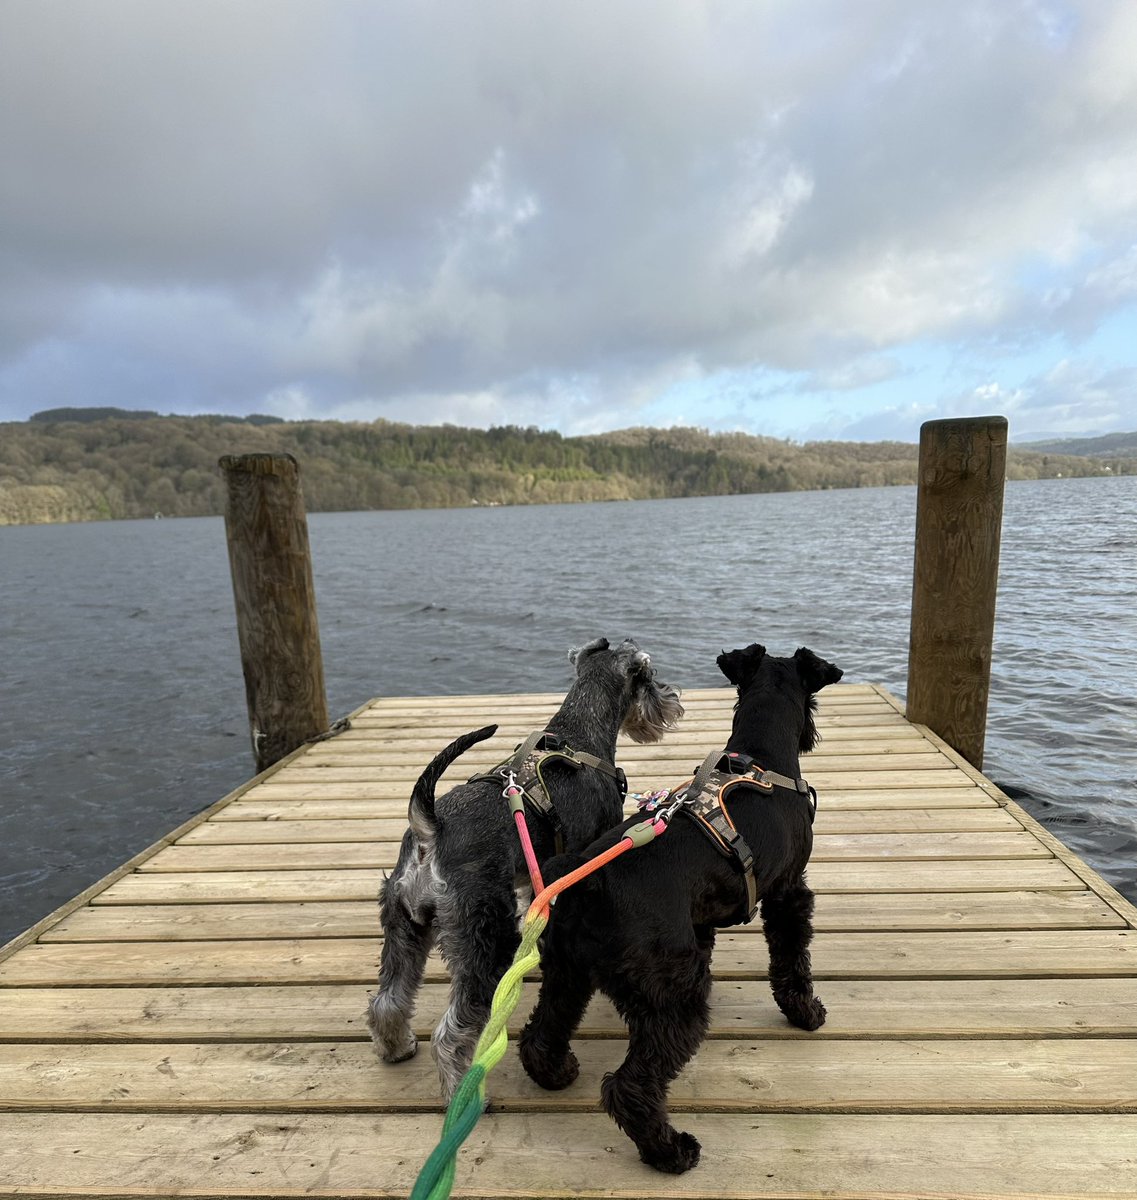 With all that’s going on in the world right now, let’s just appreciate the beauty of #Windermere #SchnauzerGang